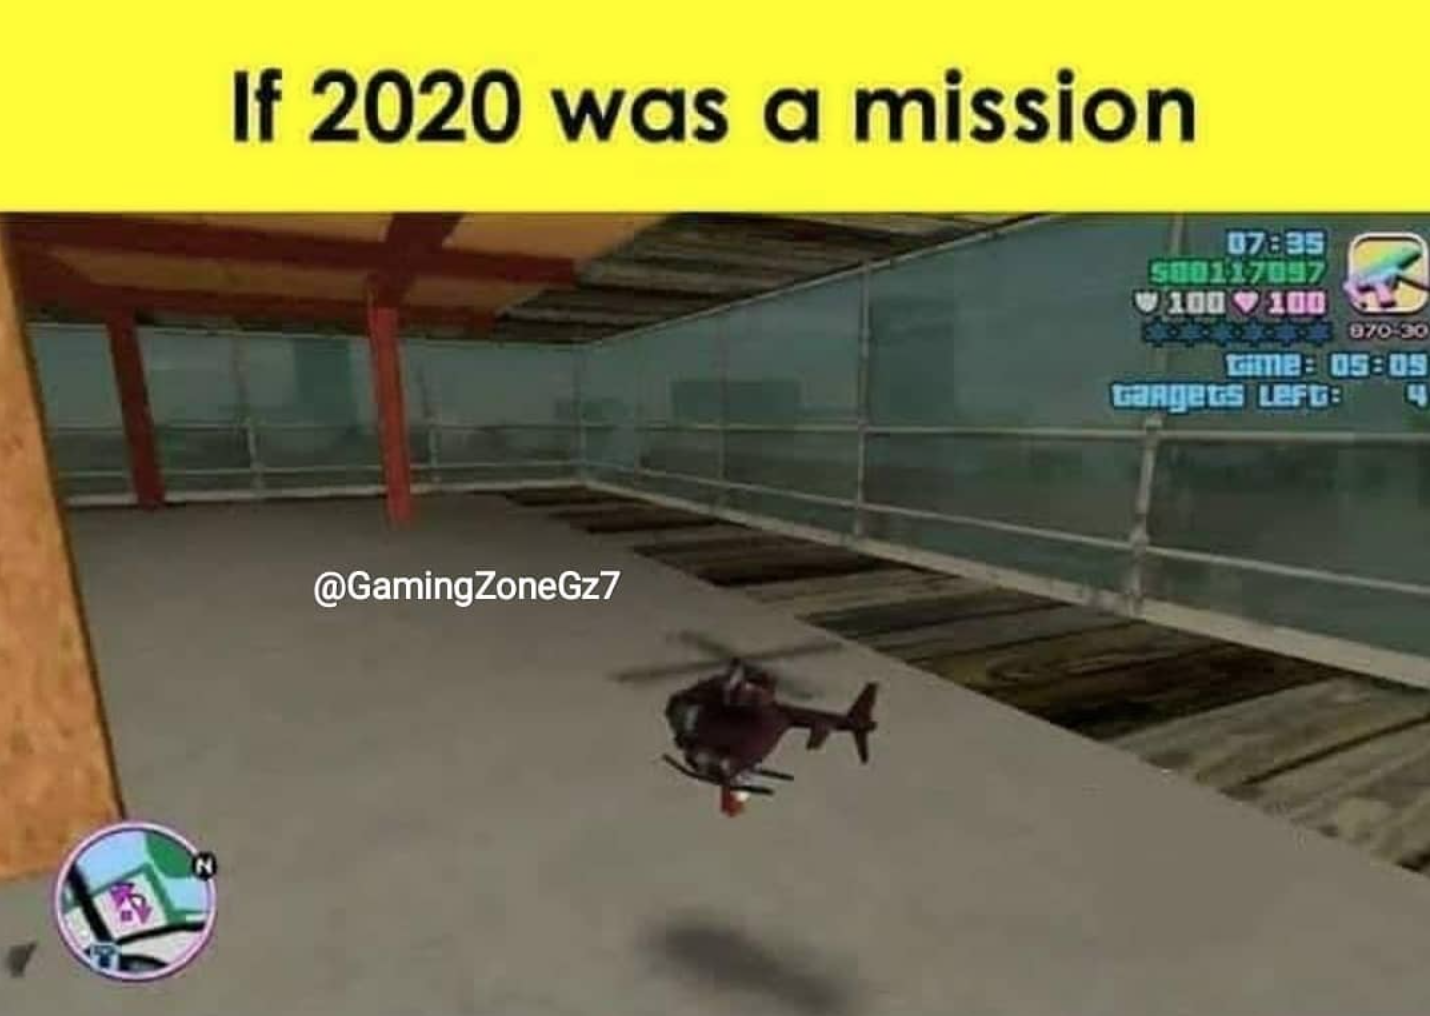 funny gaming memes - pc game - If 2020 was a mission S80117037 100 100 07030 Gine targets Lefe